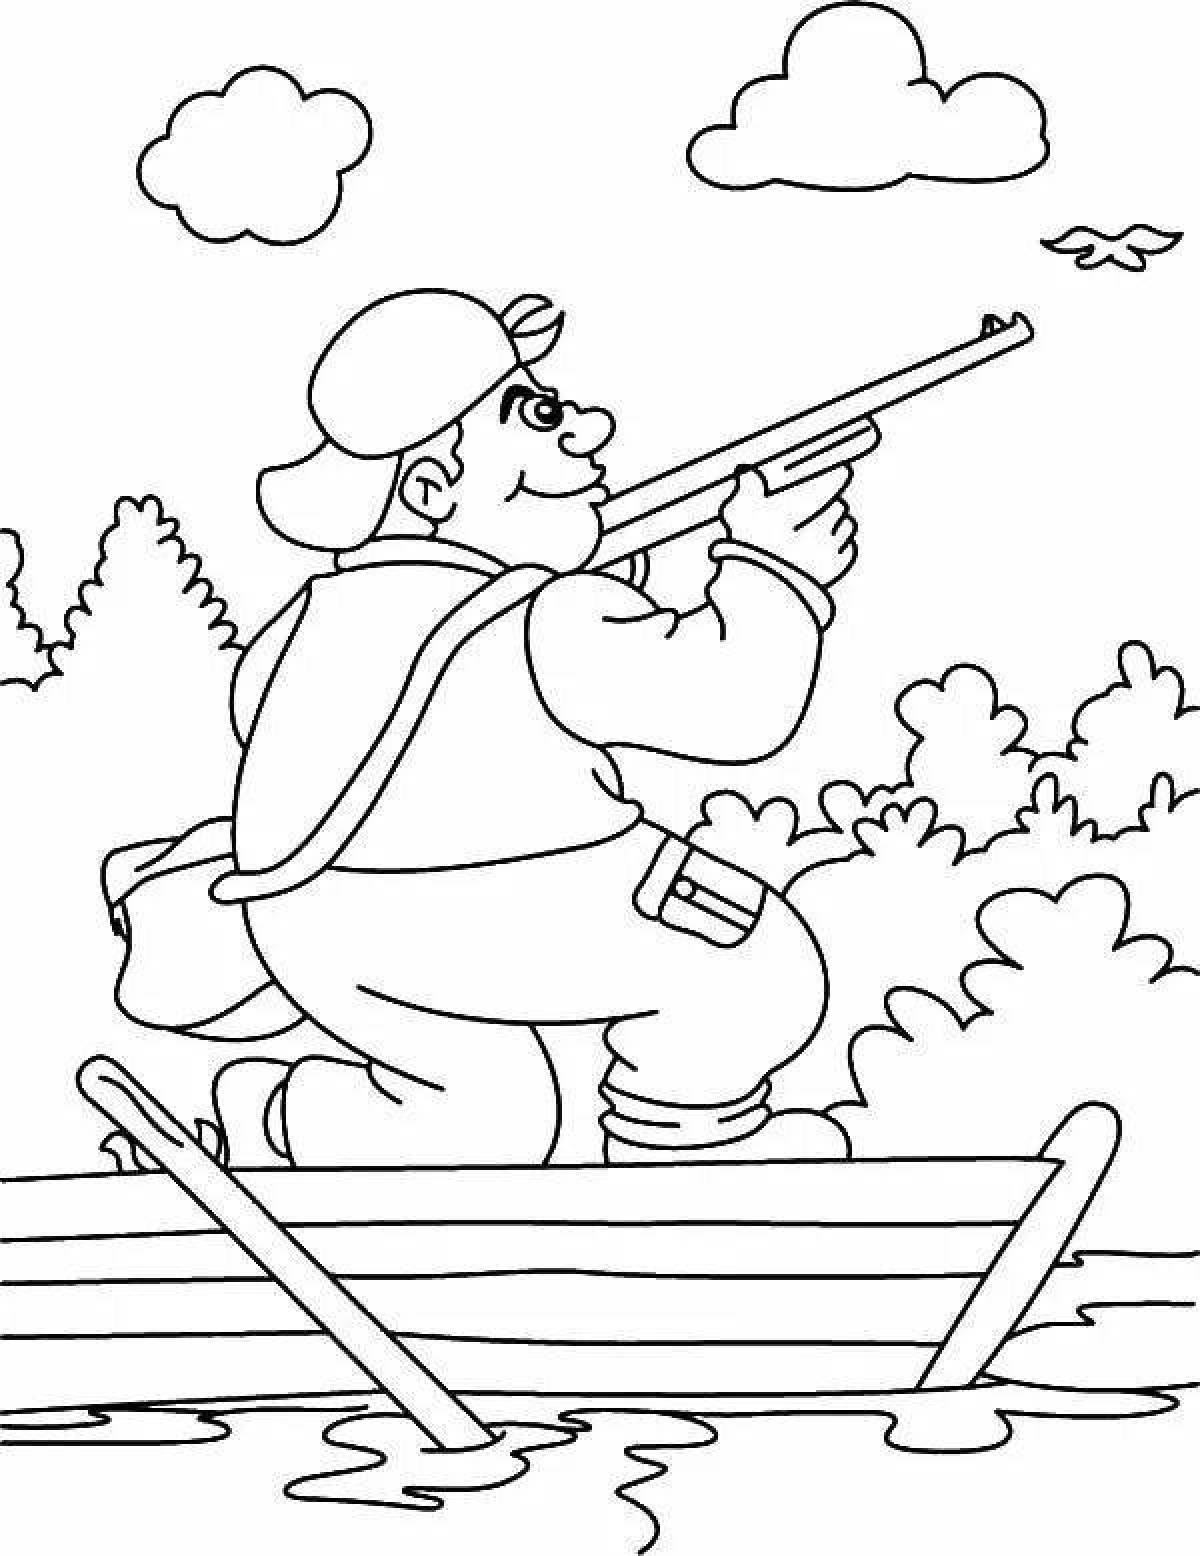 Great hunting coloring book